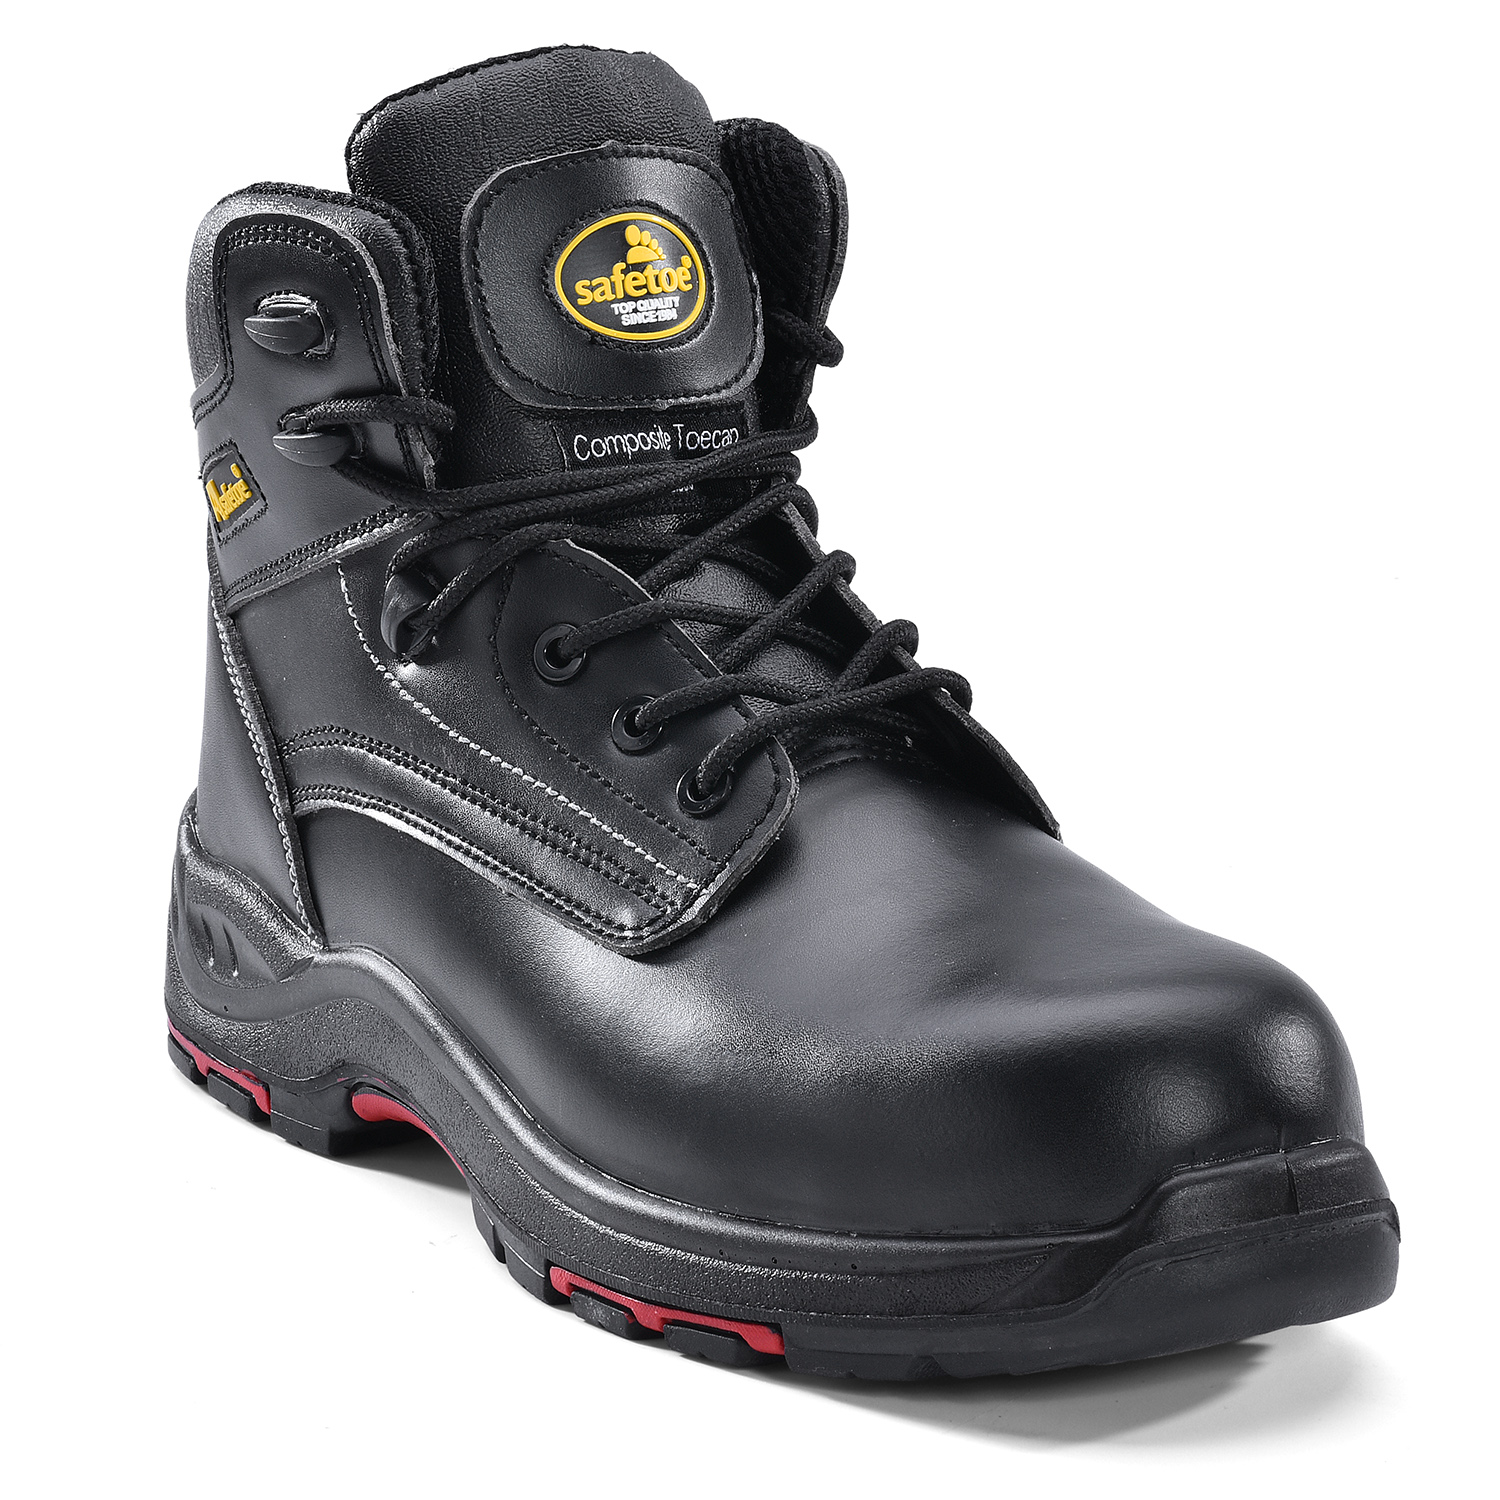 Best Chemical Resistant Safety Work Boots M-8356RB